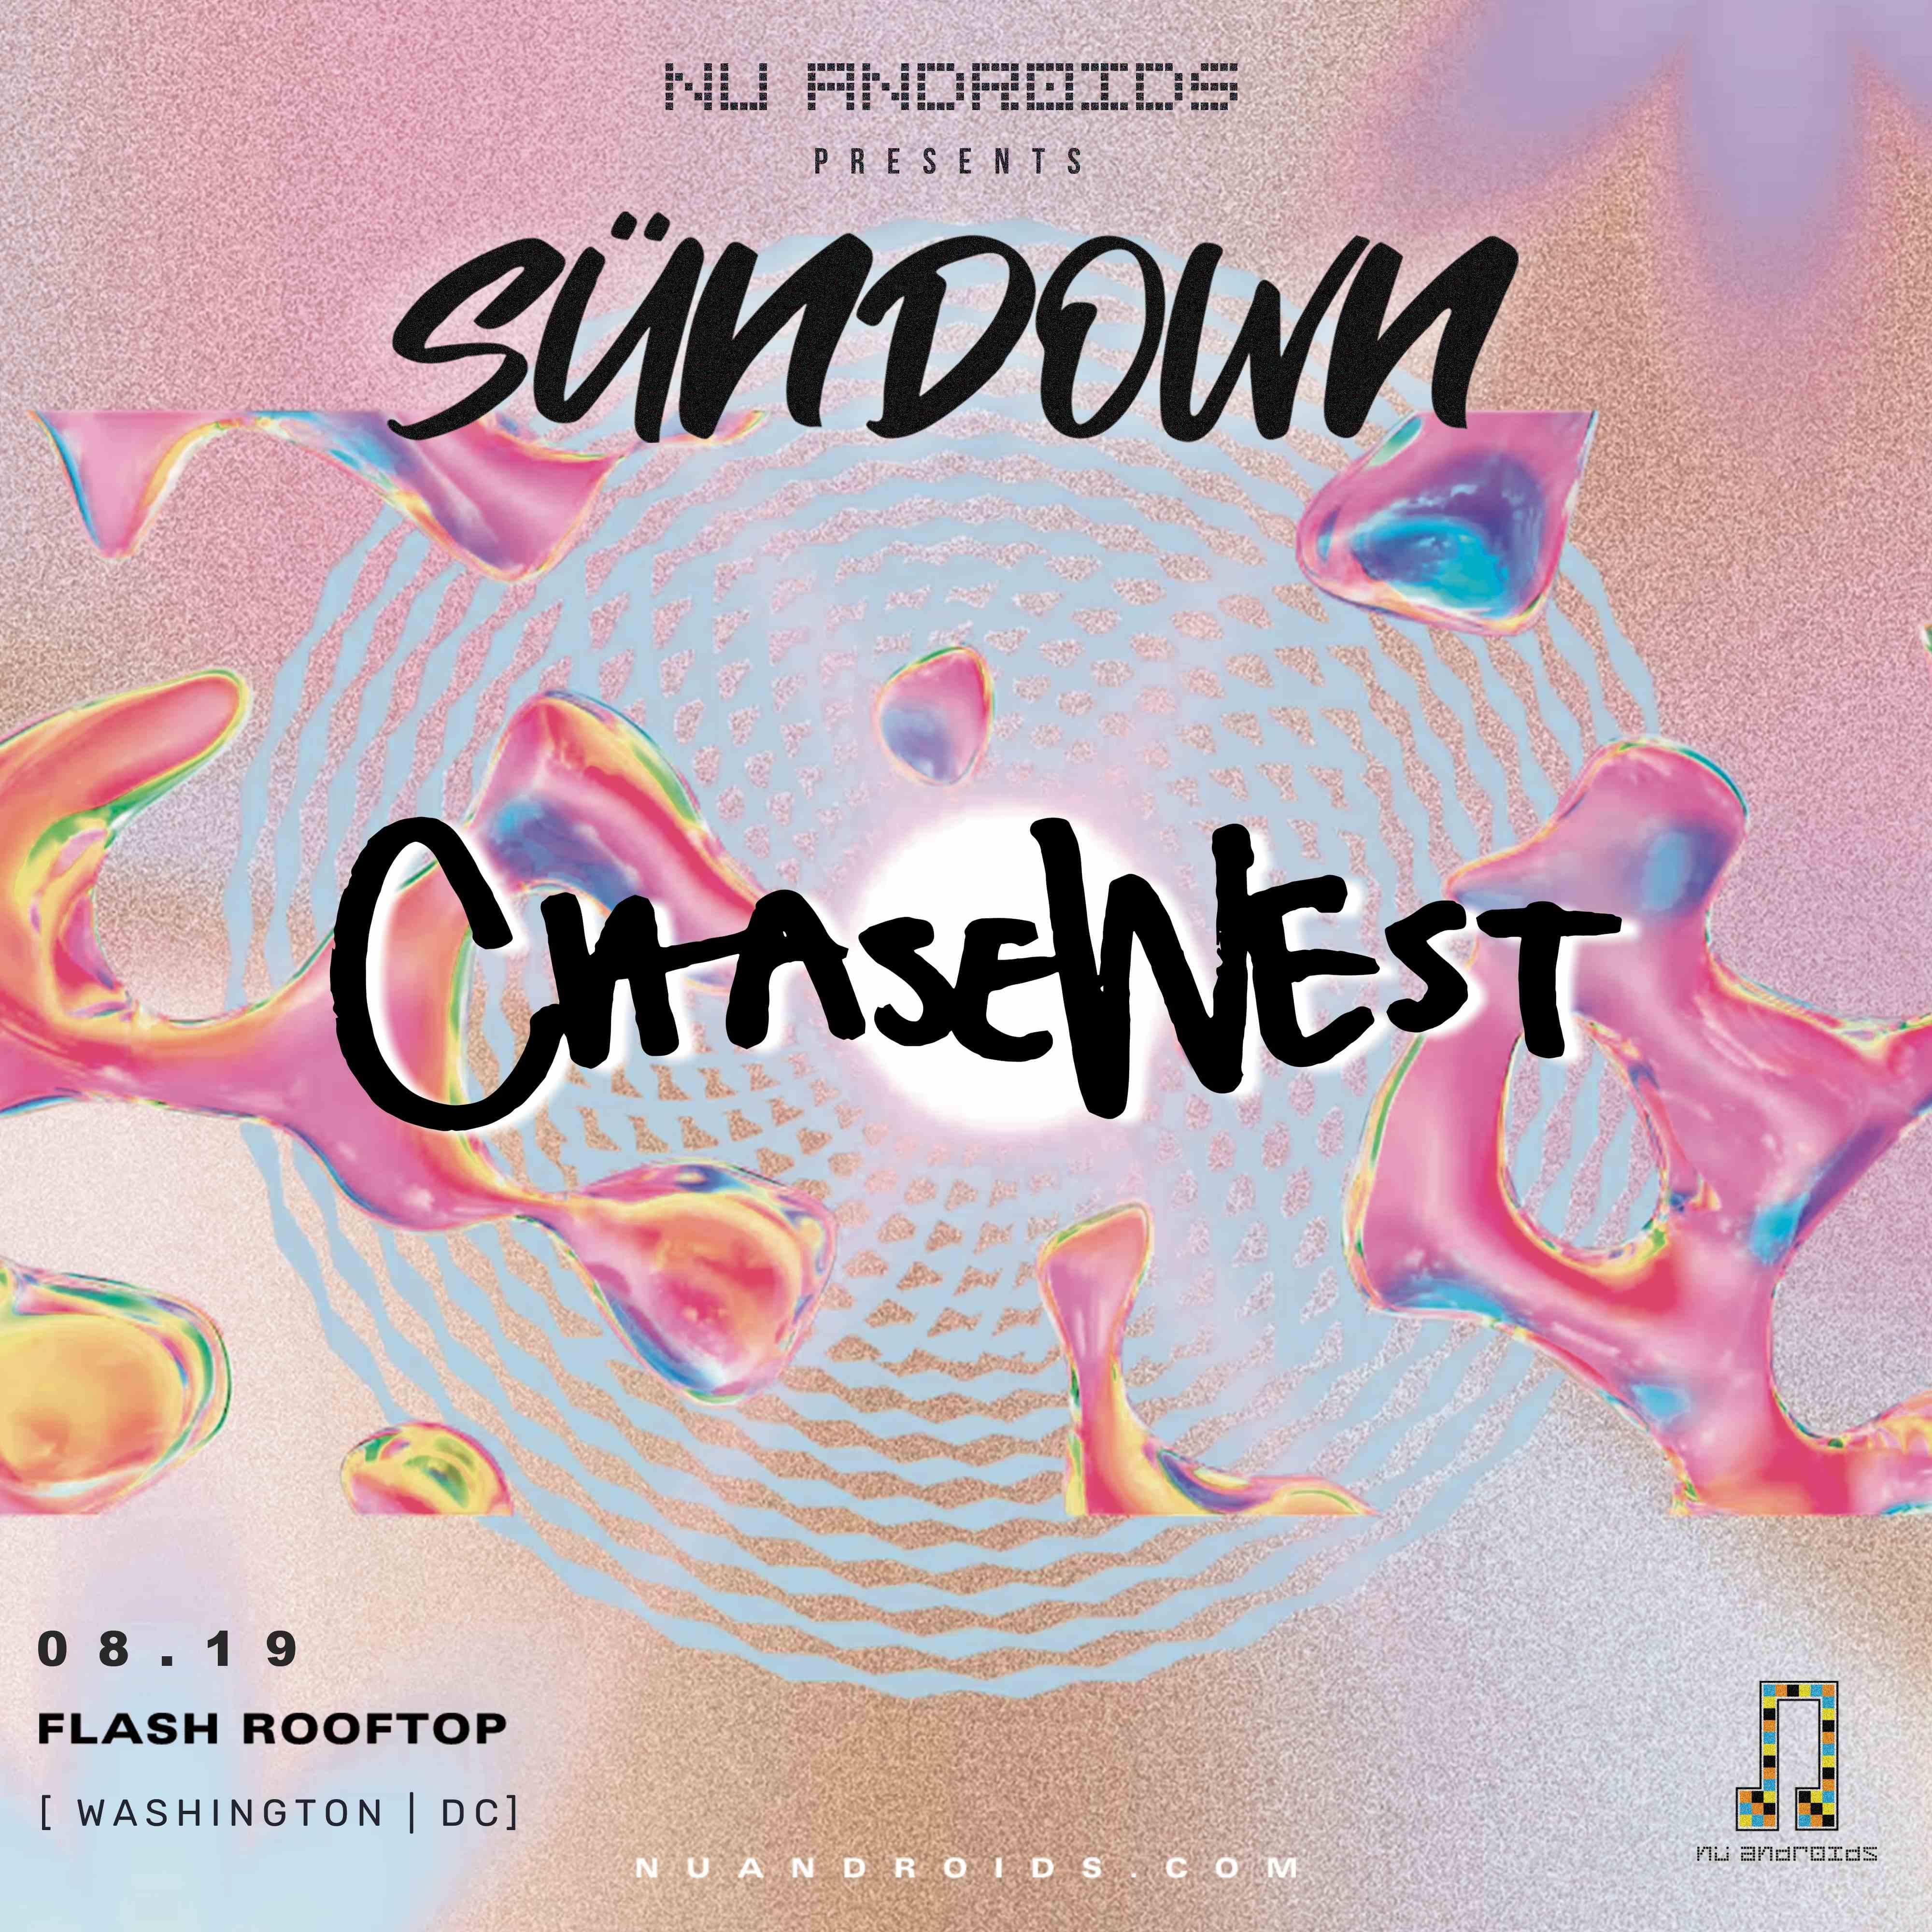 Event image for Nü Androids presents SünDown: ChaseWest (21+)